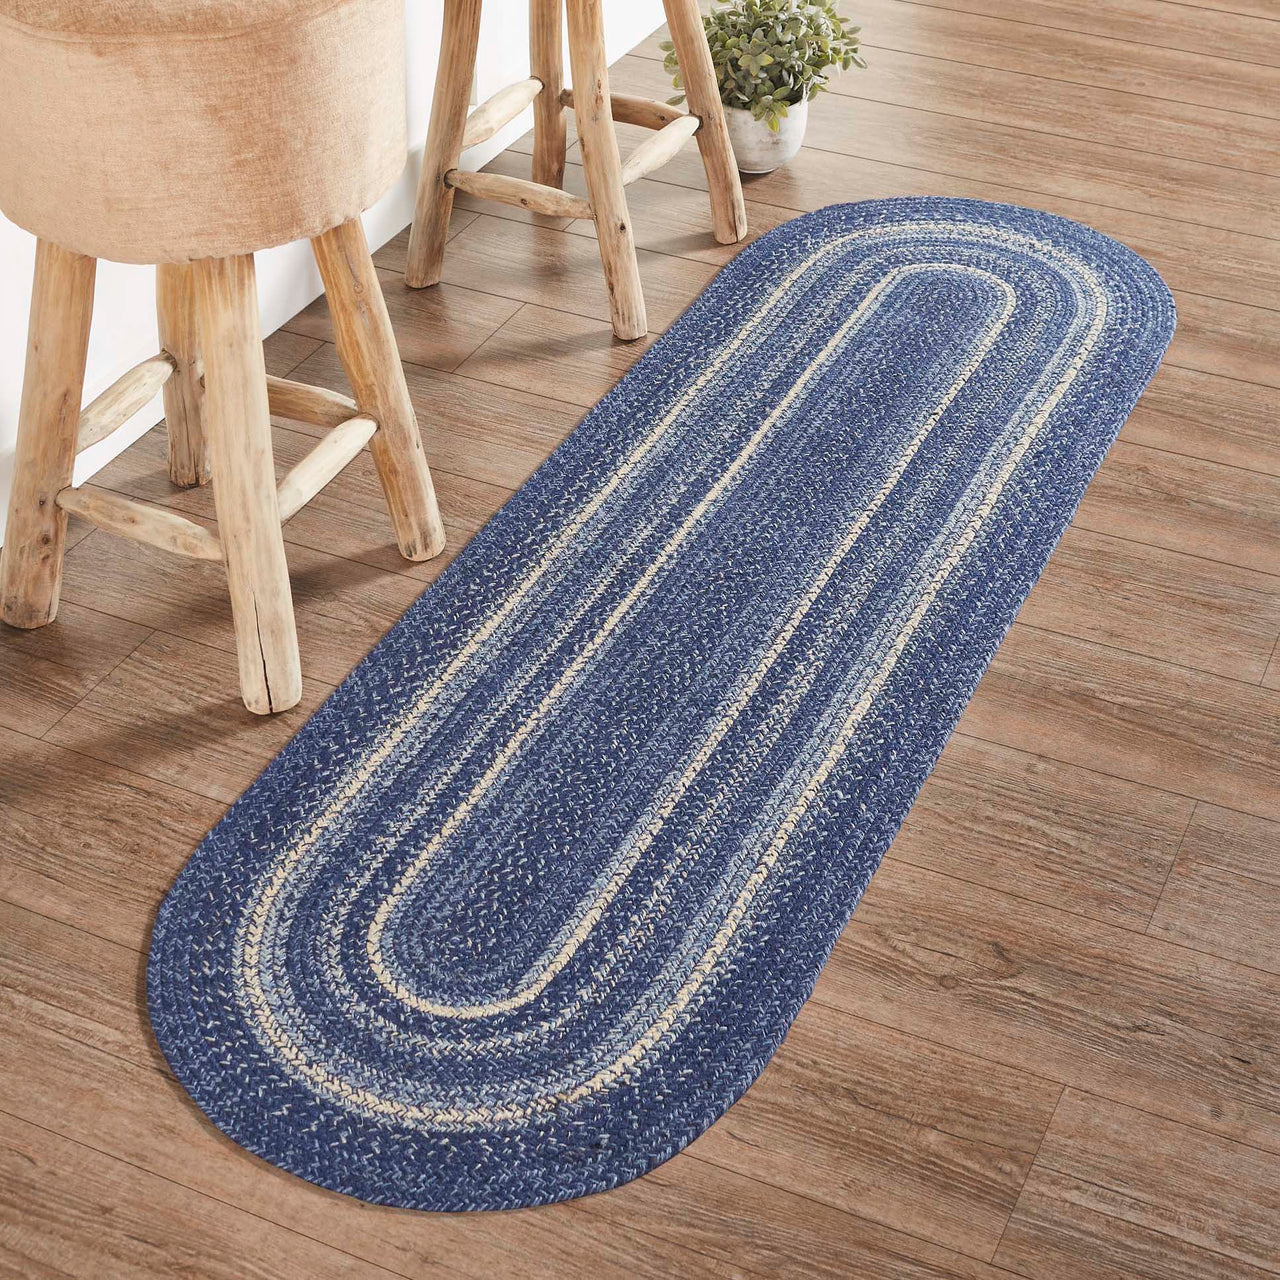 Great Falls Blue Jute Braided Rug/Runner Oval with Rug Pad 22"x72" VHC Brands